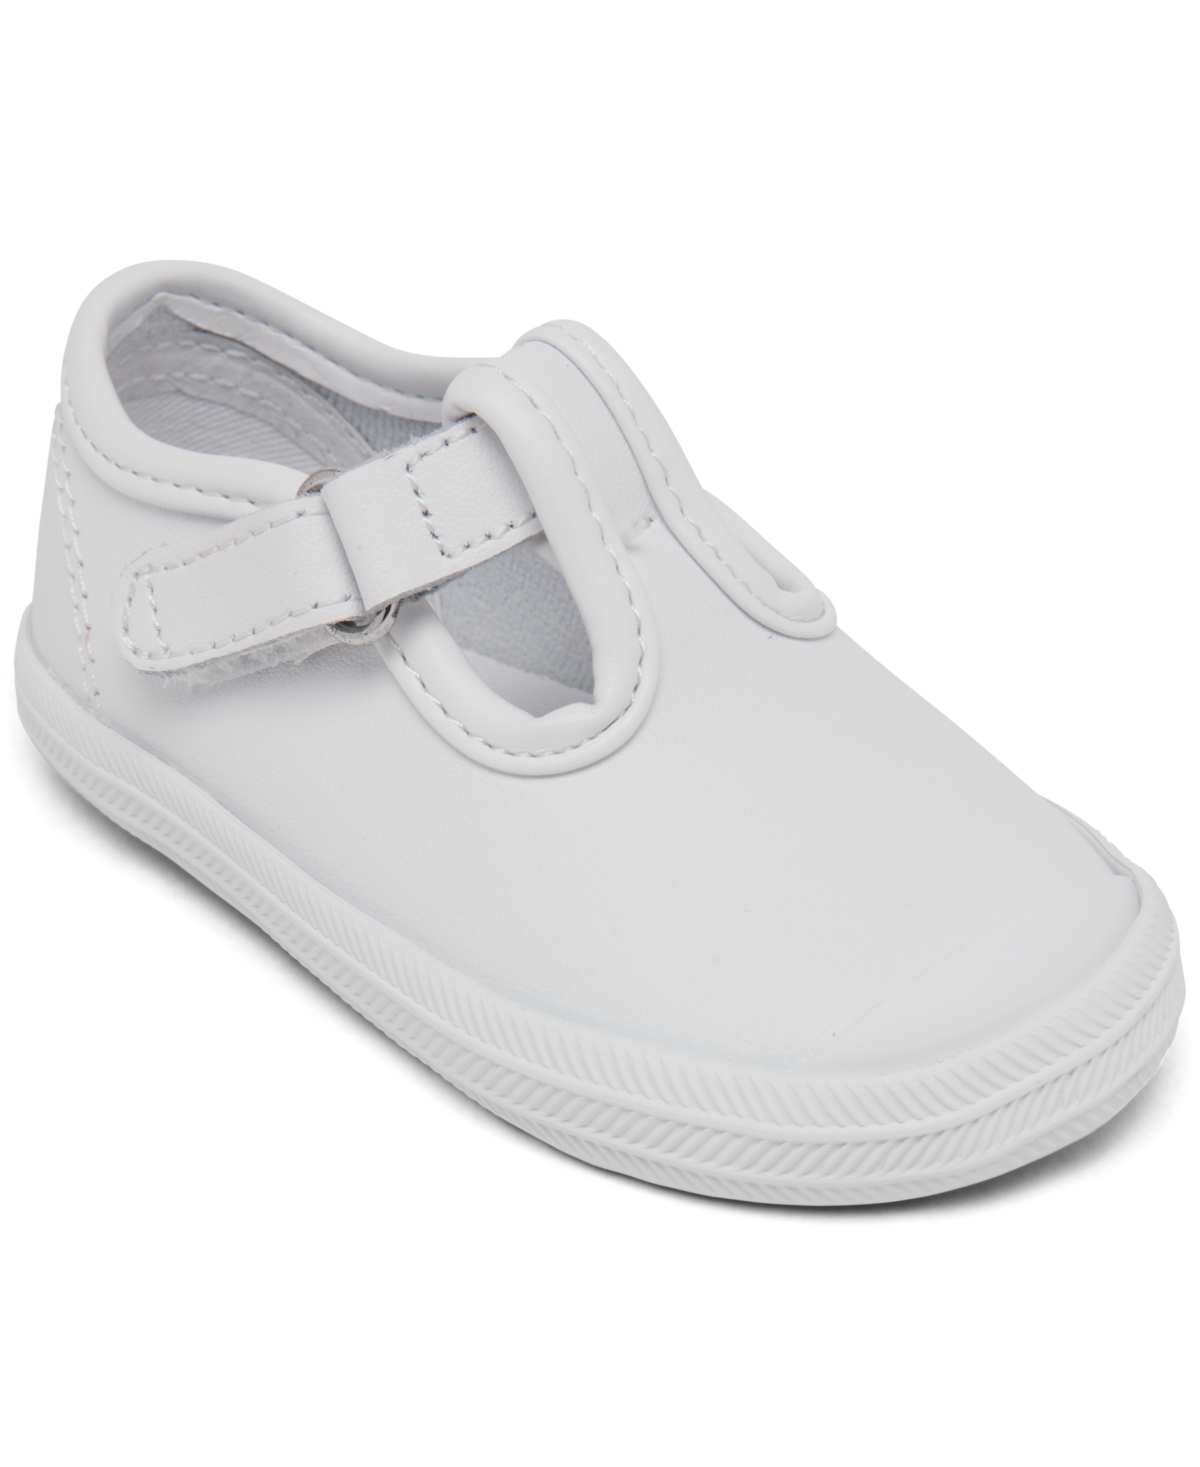 UPC 044214157150 product image for Keds Champion Toe-Cap T-Strap Shoes, Baby Girls & Toddler Girls | upcitemdb.com